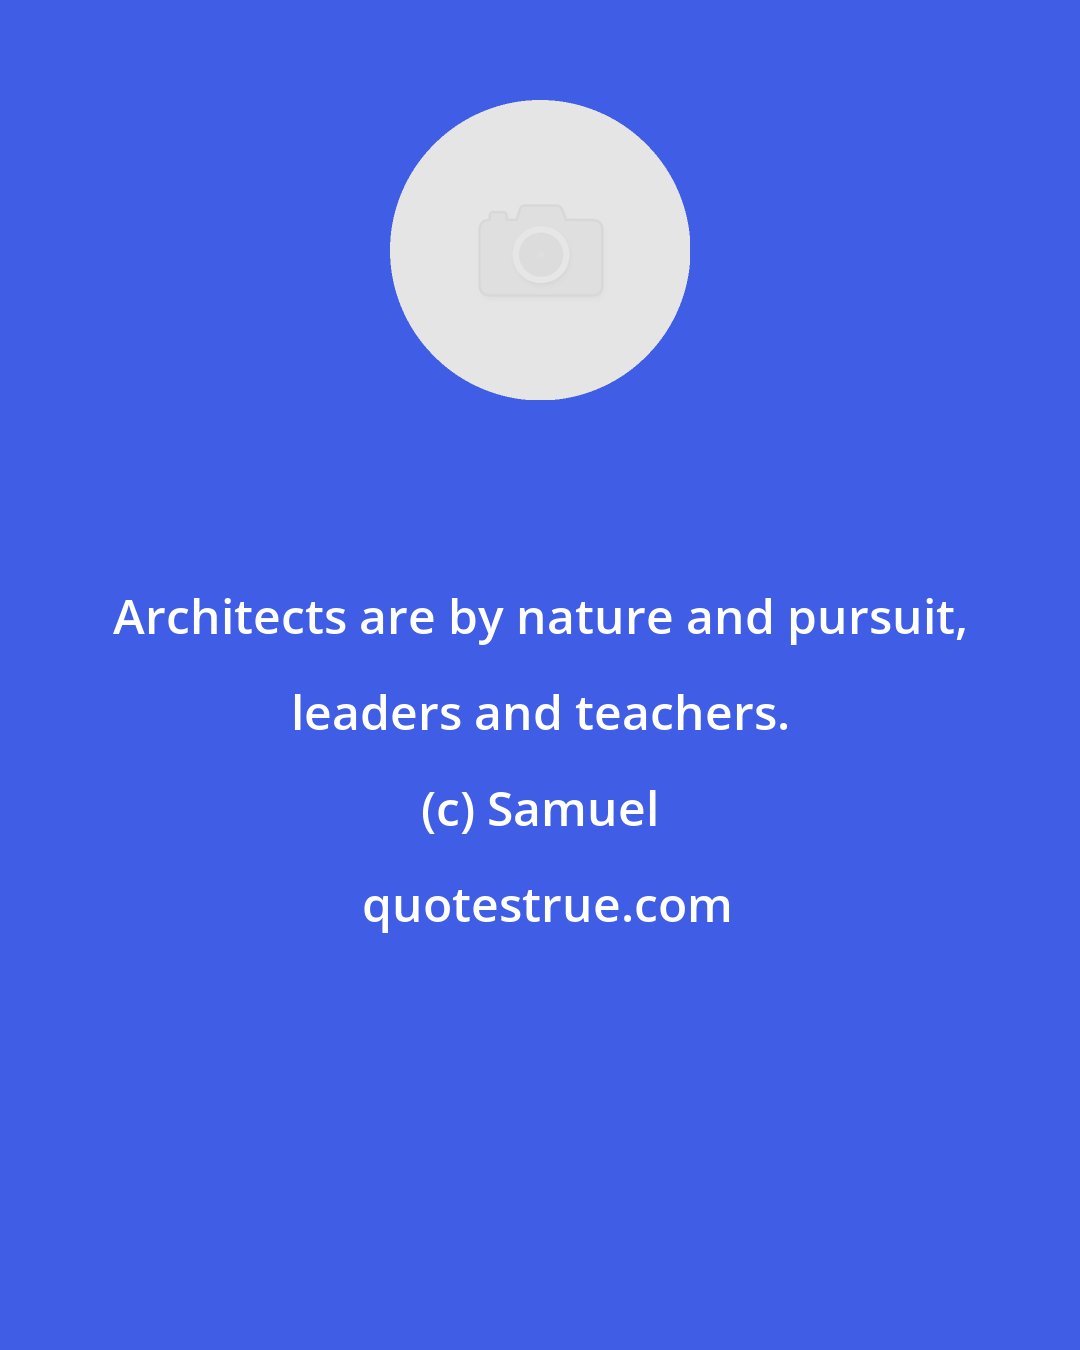 Samuel: Architects are by nature and pursuit, leaders and teachers.